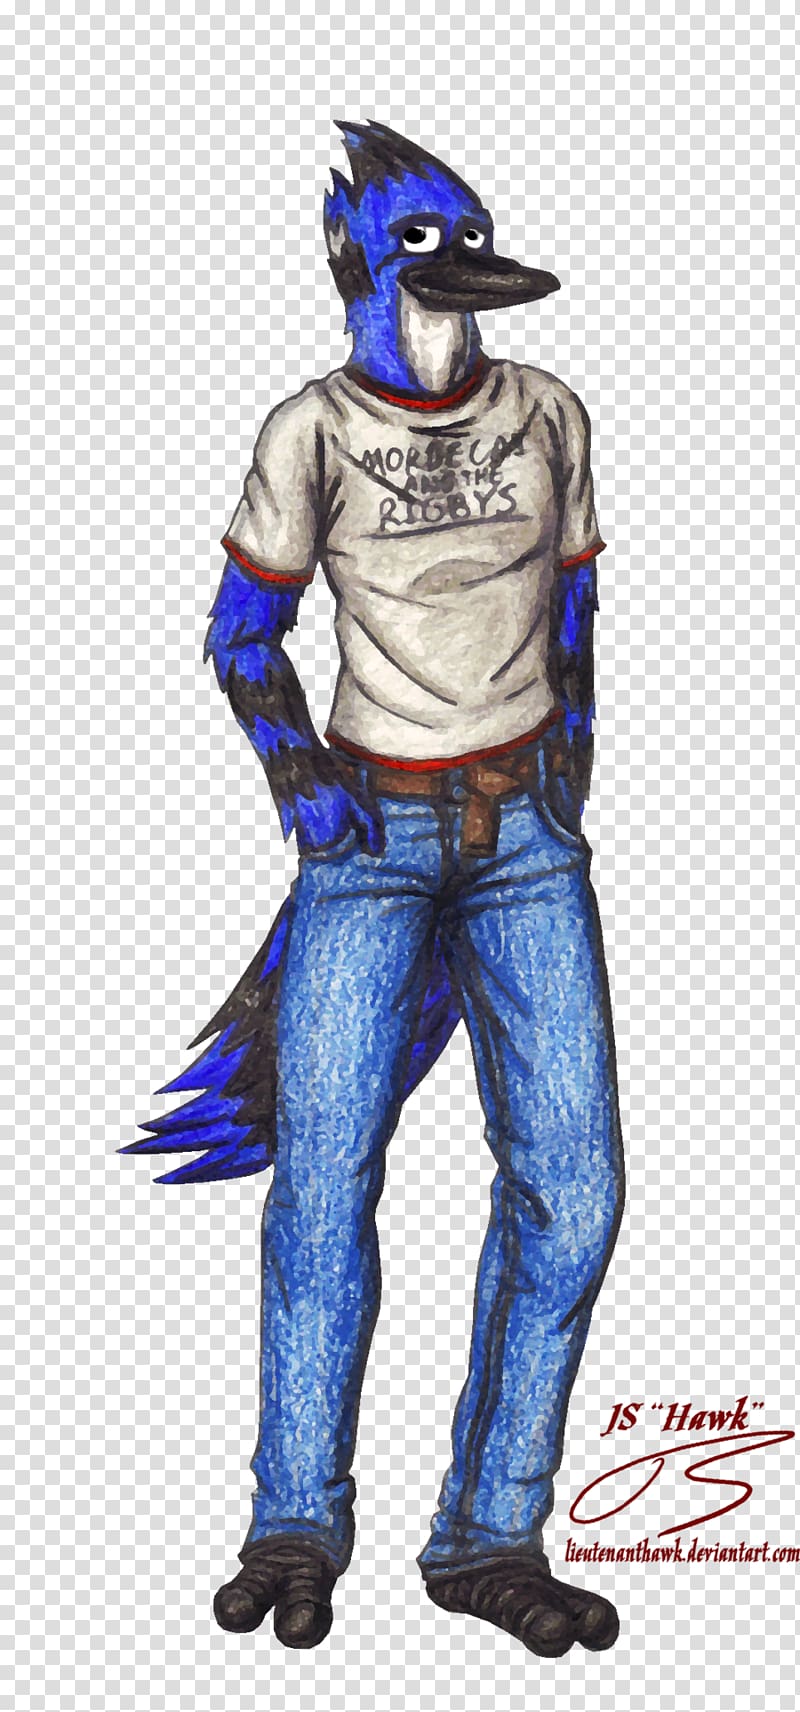 Page 3 Regular Show Mordecai Transparent Background Png Cliparts Free Download Hiclipart - roblox r68